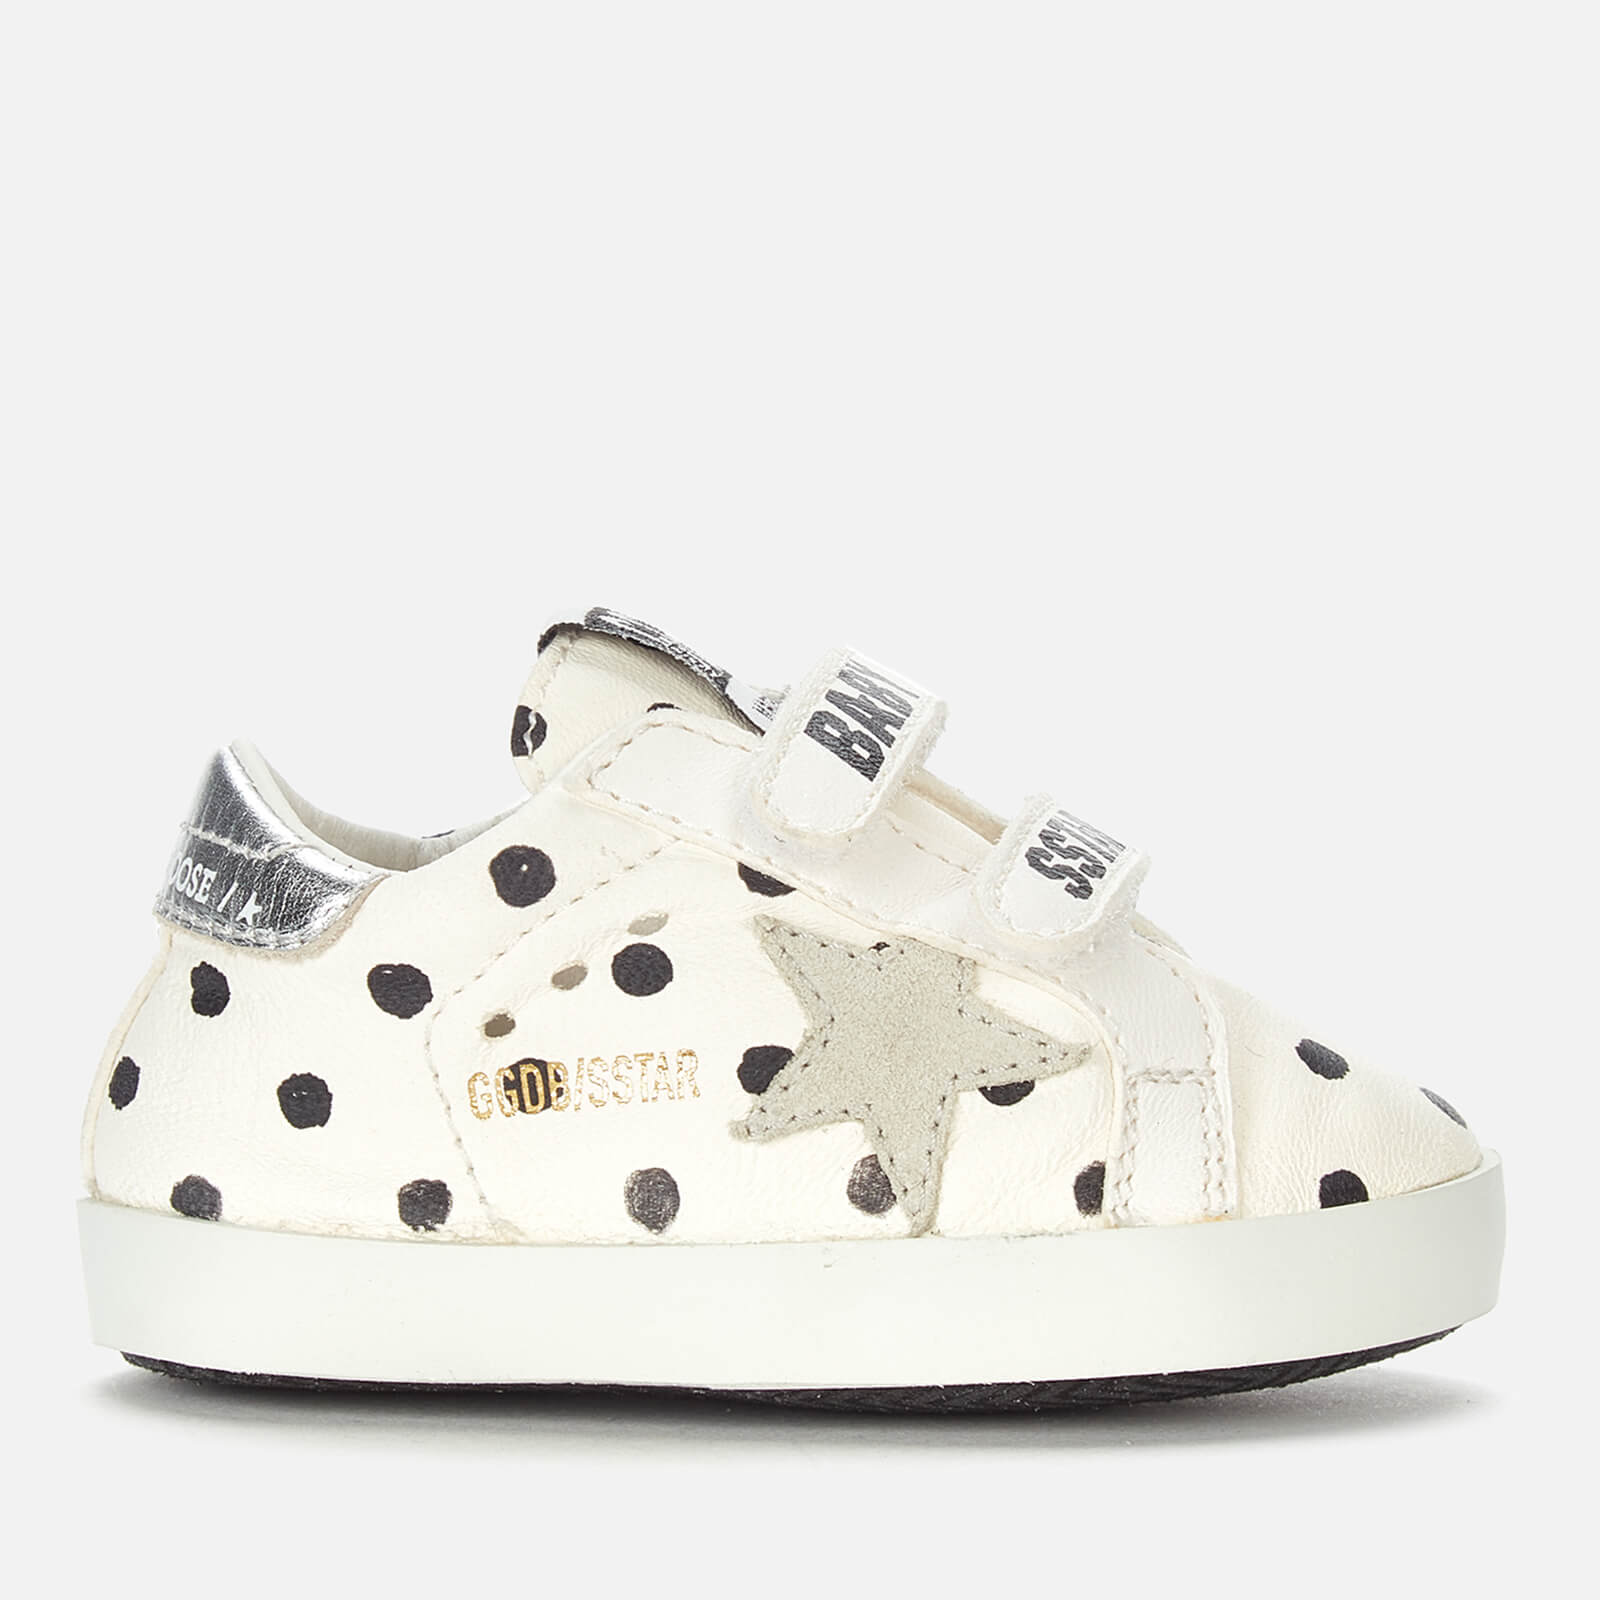 Golden Goose Deluxe Brand Babies' School Pois Print Trainers - White/Black Pois/Ice/Silver - UK 0 Infant